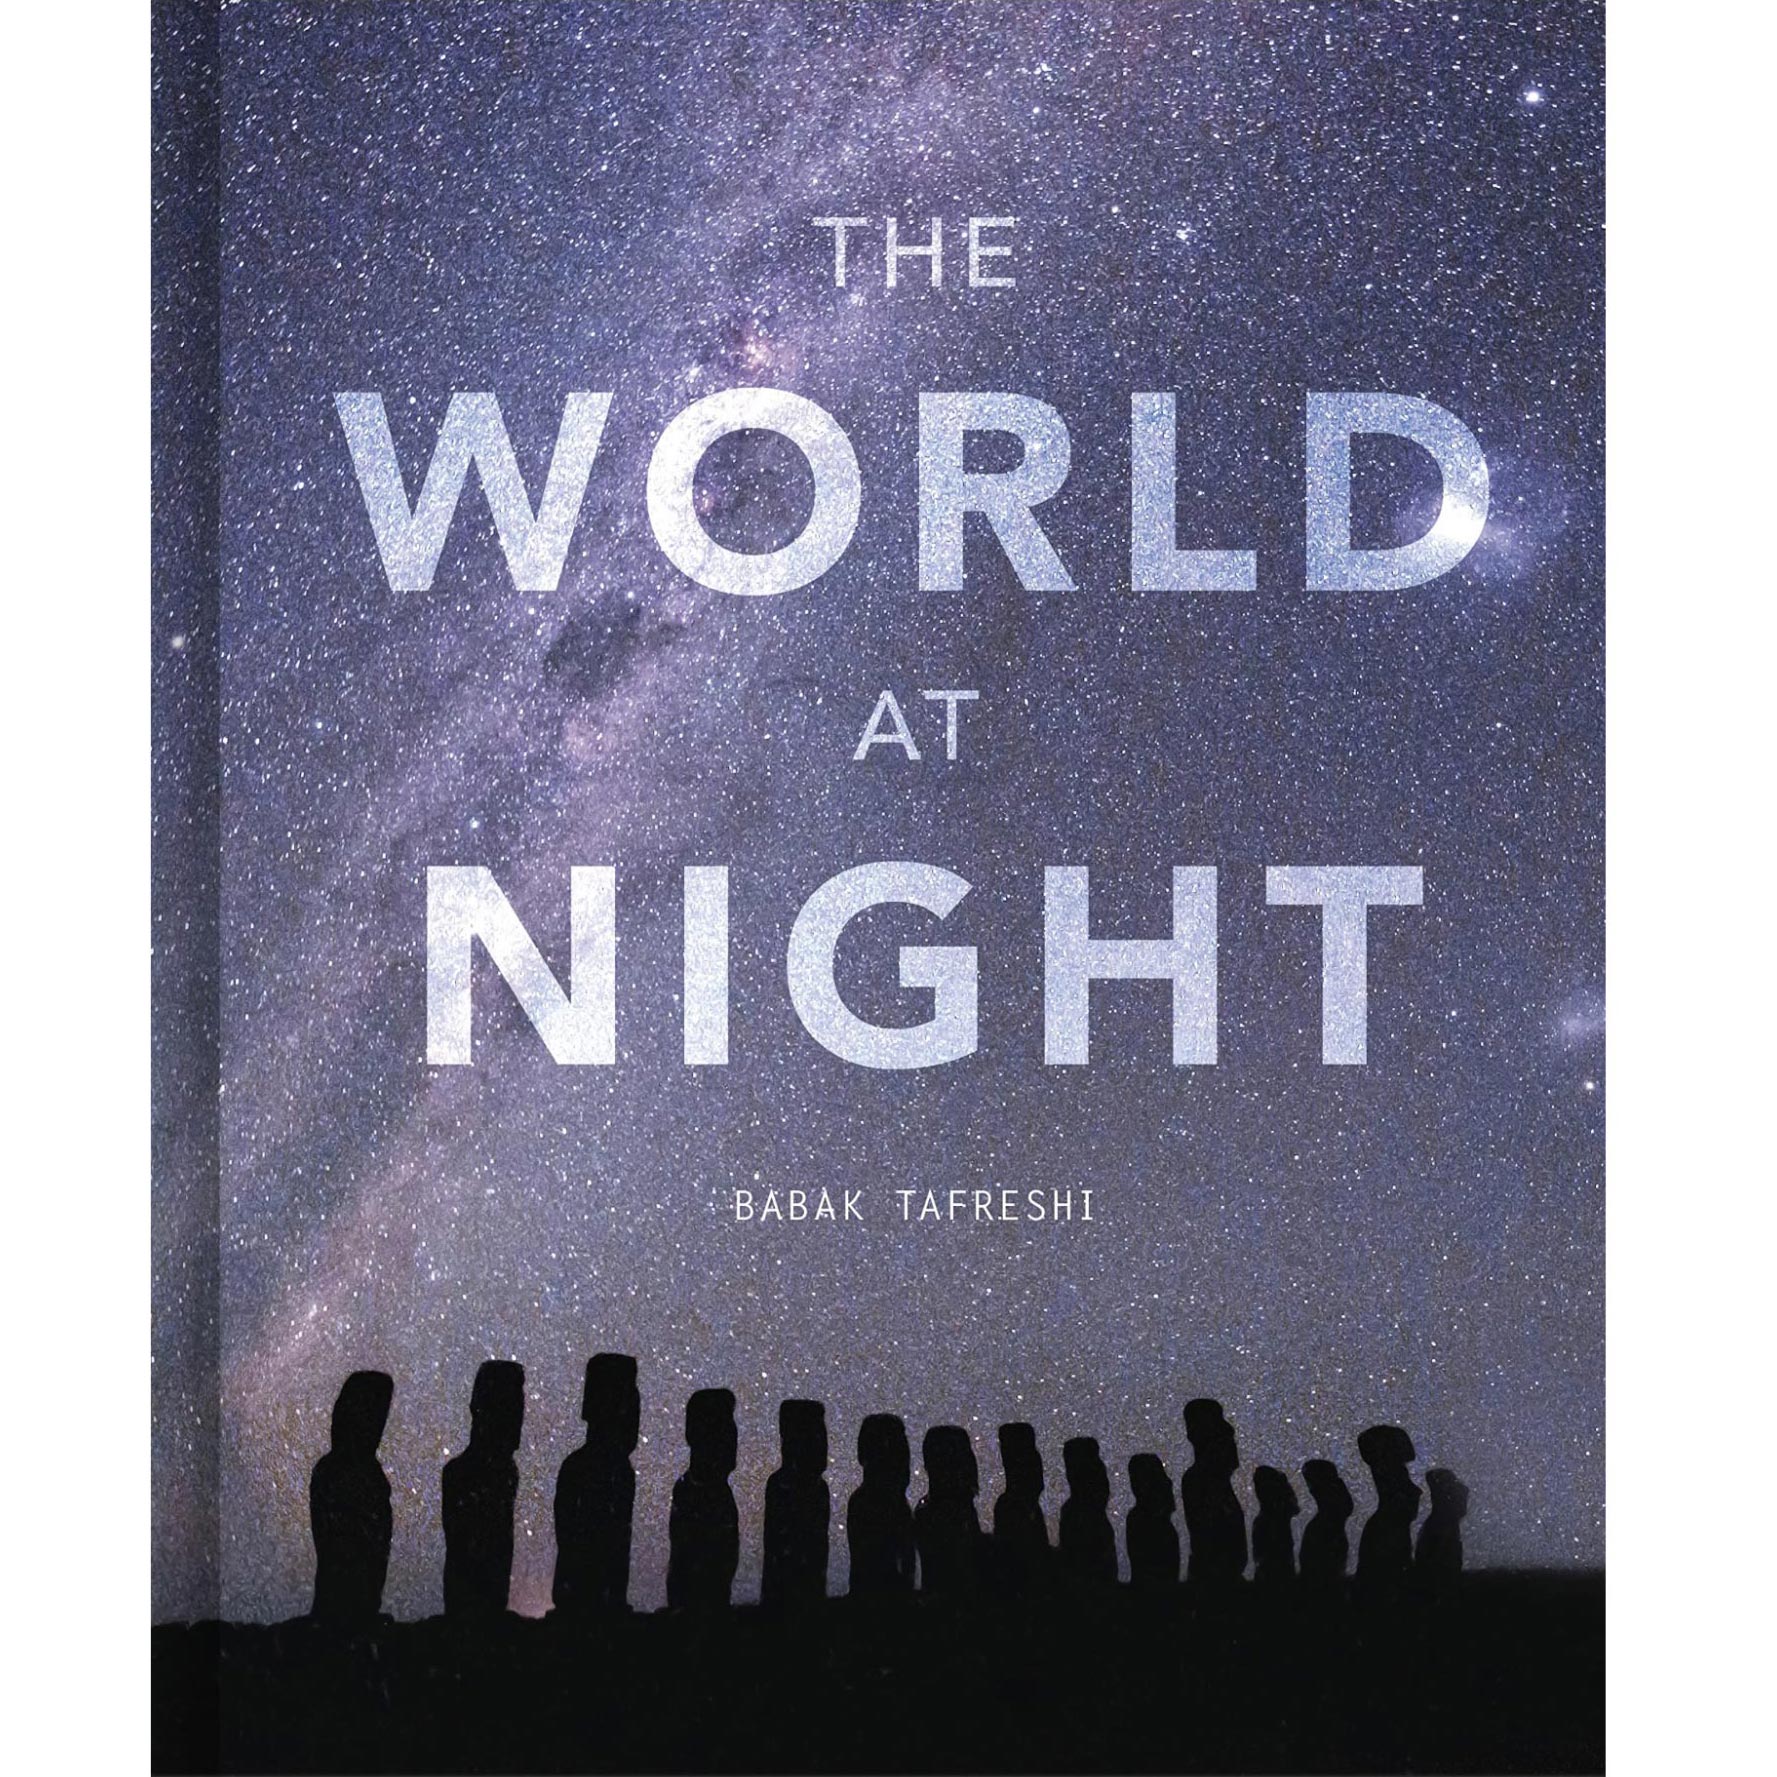 The World at Night Book by Babak Tafreshi, autographed